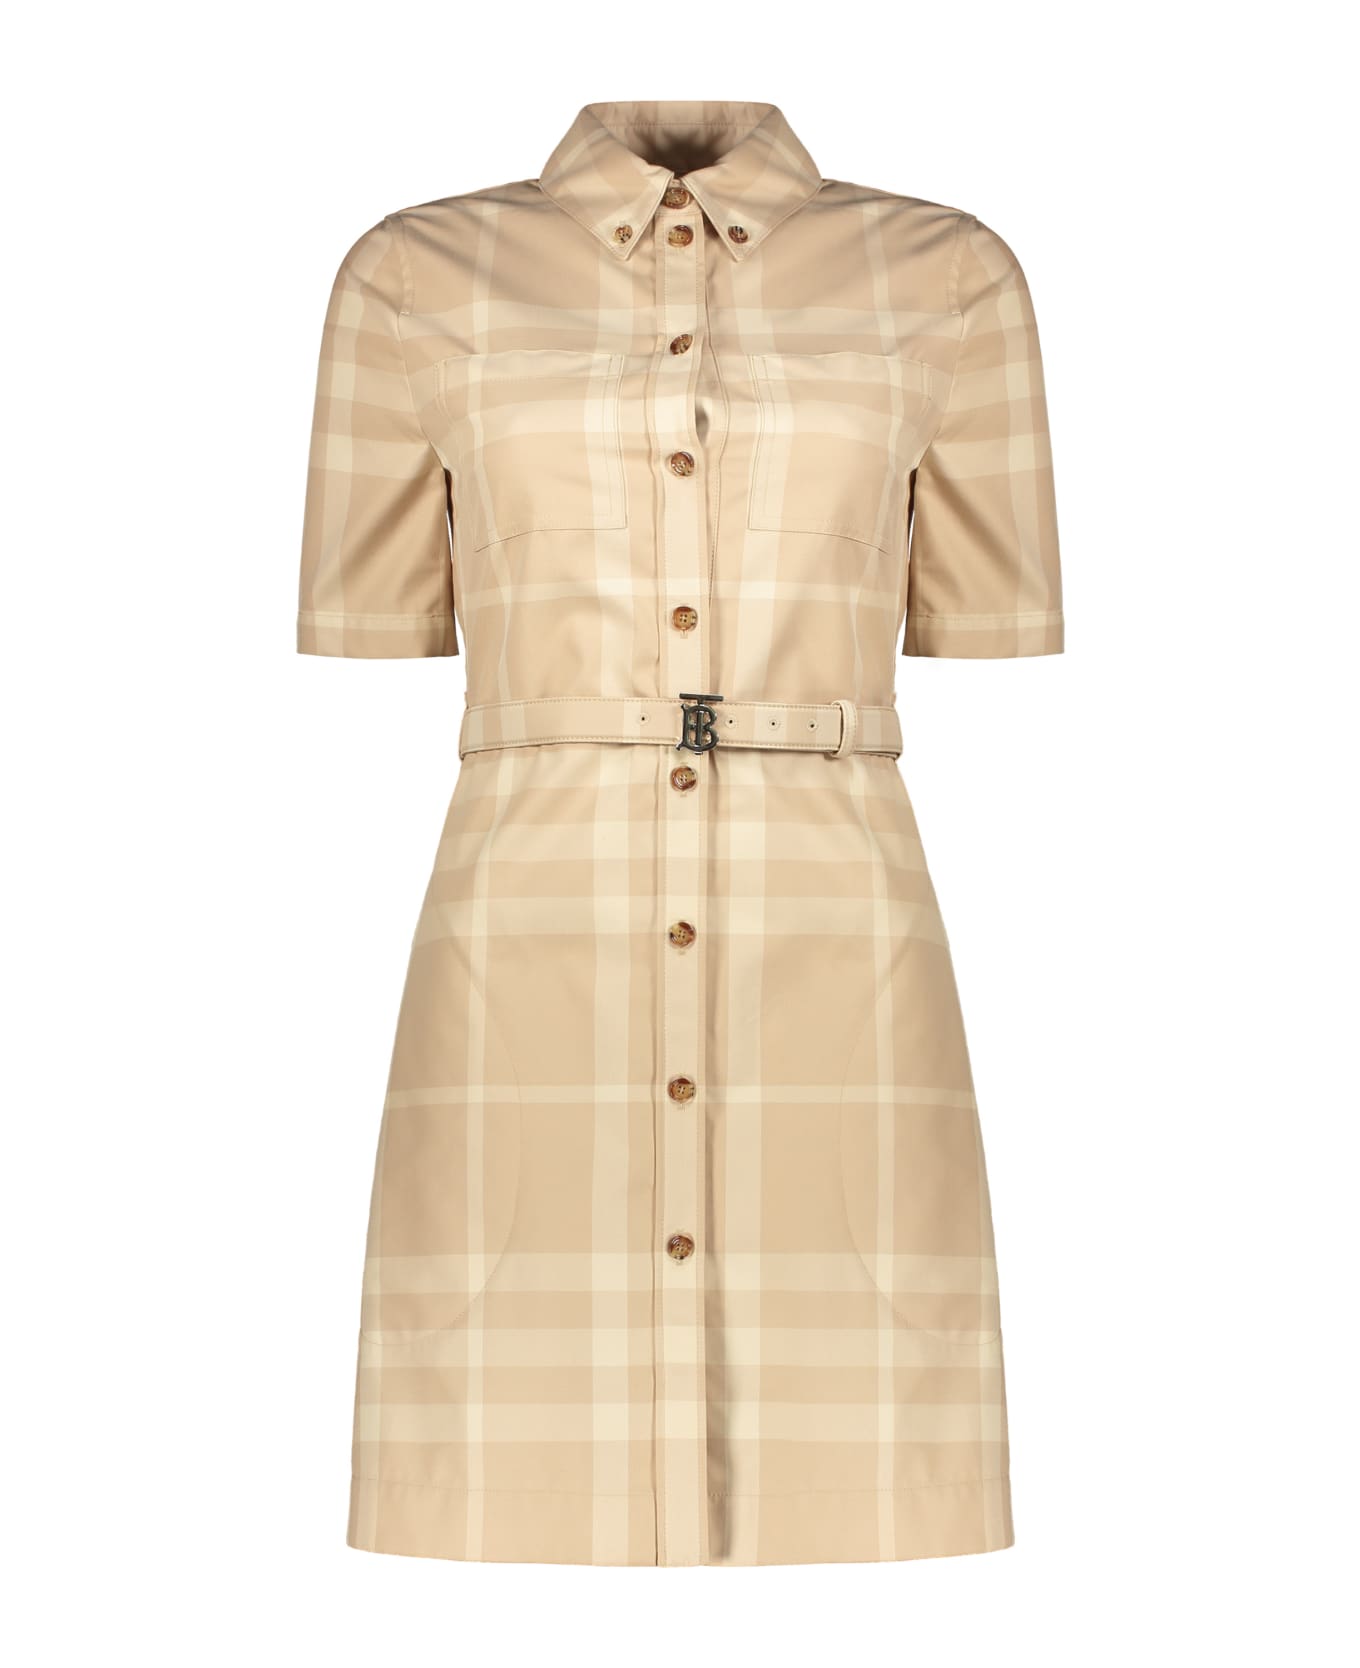 Burberry Belted Cotton Dress - Beige